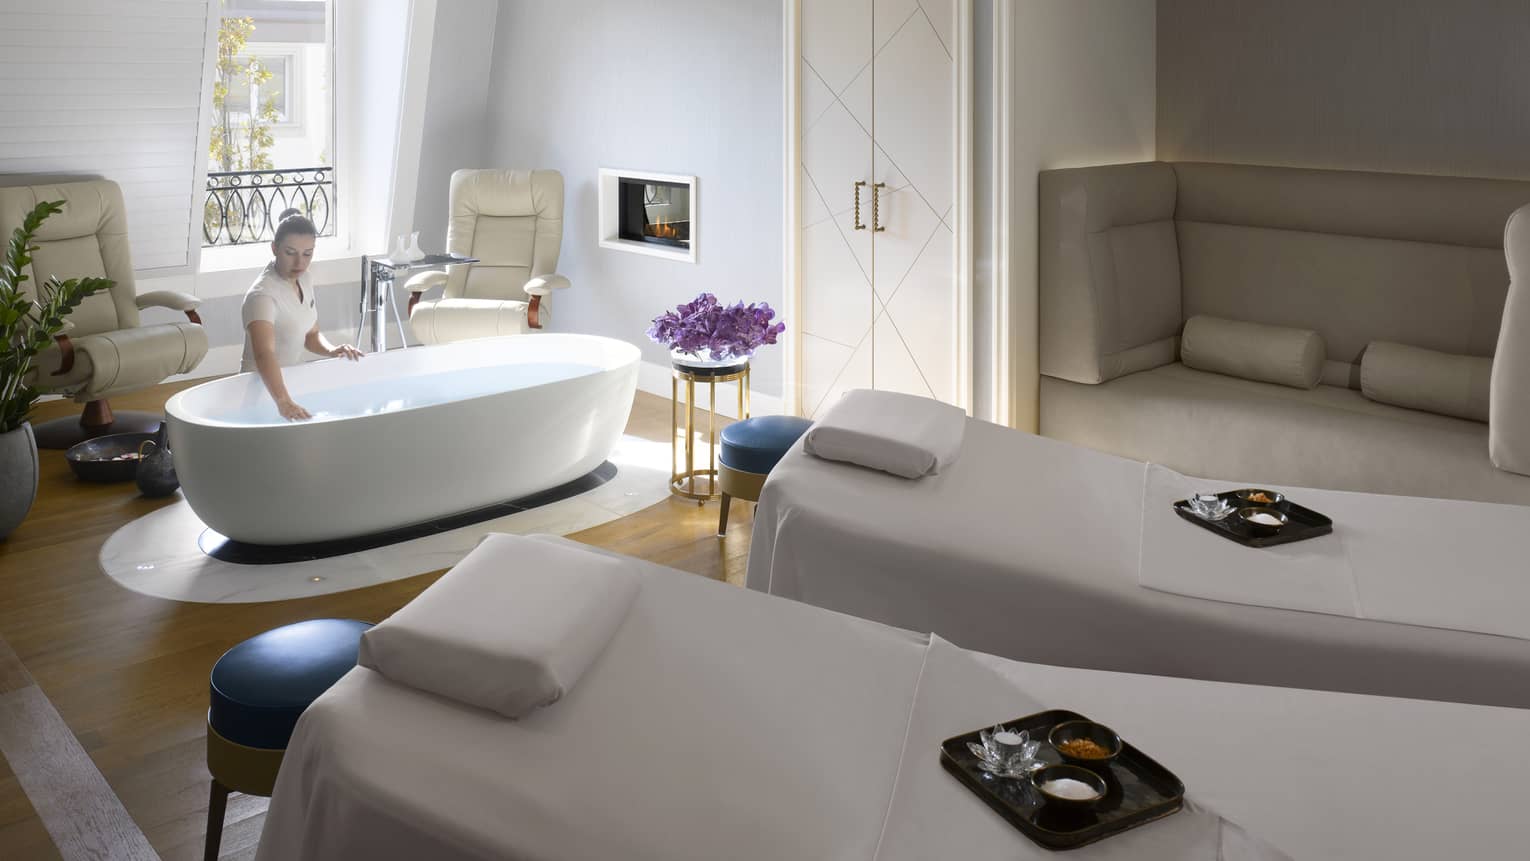 Two white spa beds side-by-side with yellow sashes, trays with salts and oils, woman makes bath